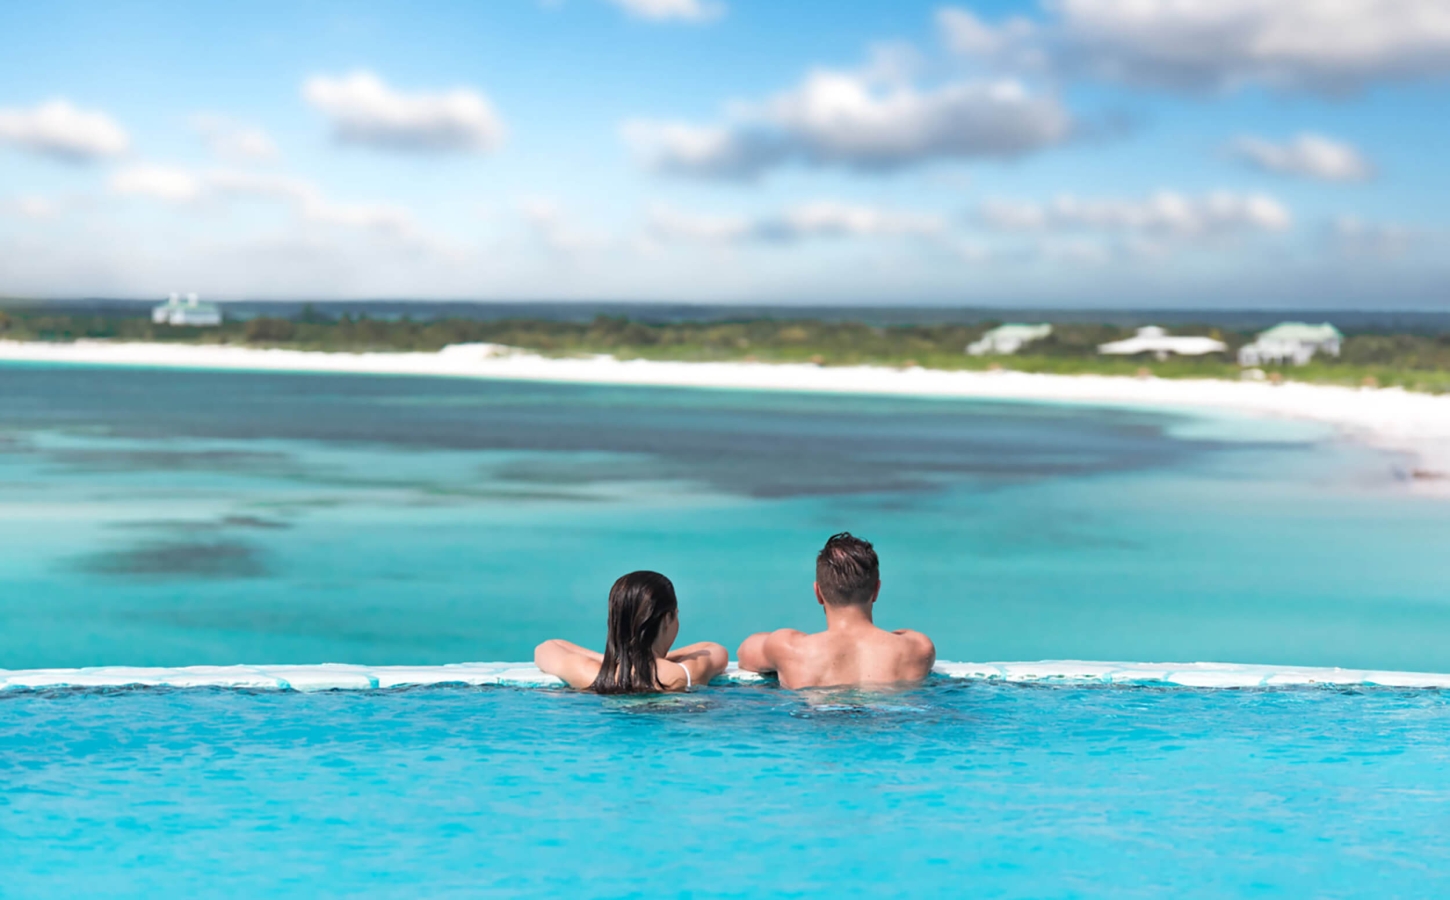 A couple enjoying the infinity pool at The Abaco Club, overlooking the pristine Bahamian coast.